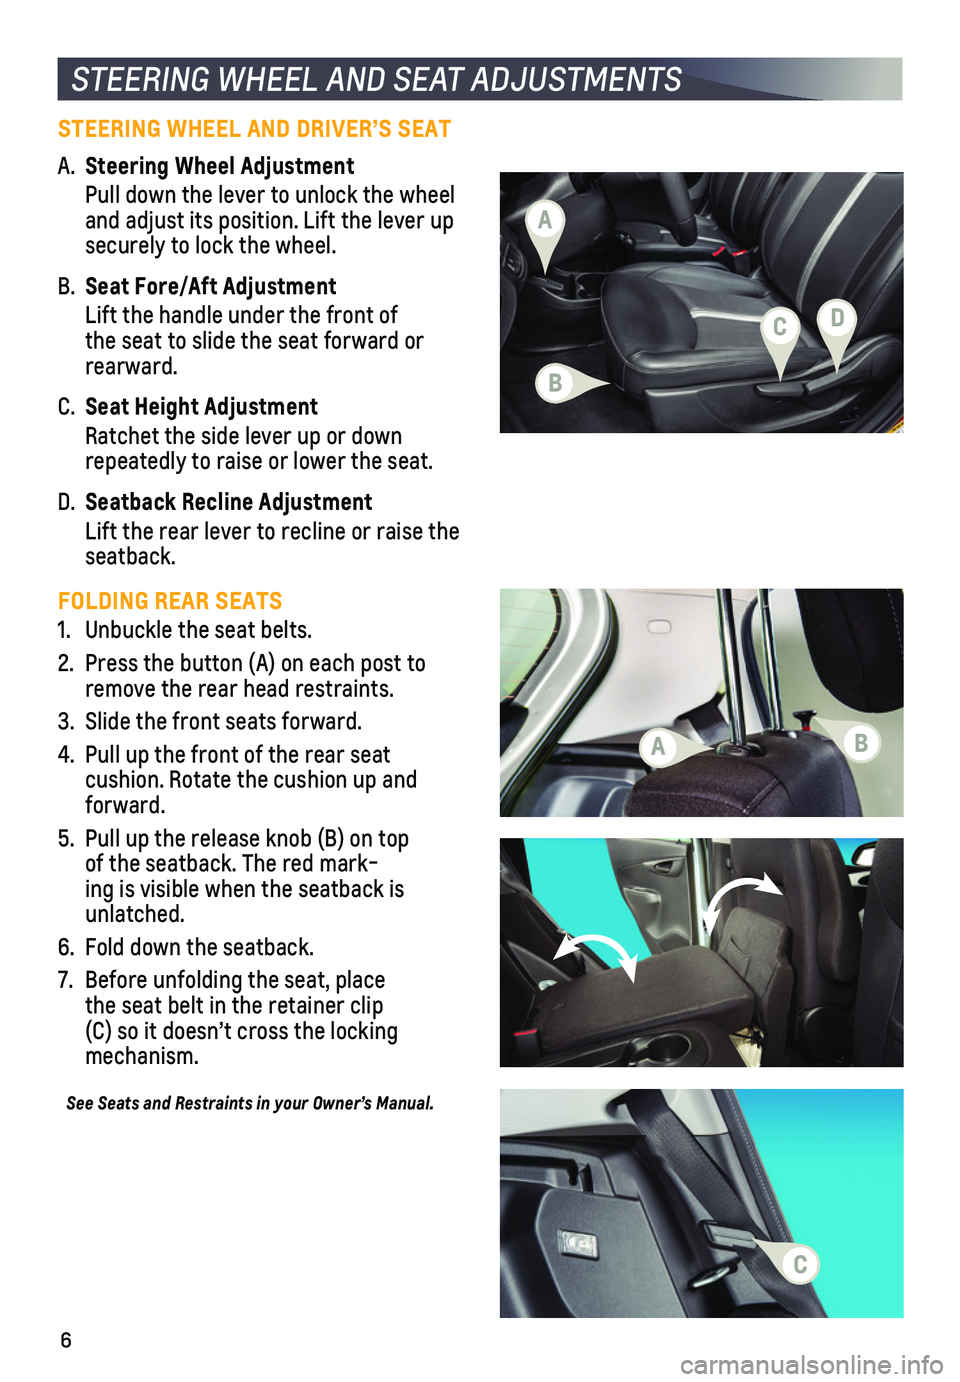 CHEVROLET SPARK 2020  Get To Know Guide 6
STEERING WHEEL AND SEAT ADJUSTMENTS
STEERING WHEEL AND DRIVER’S SEAT 
A. Steering Wheel Adjustment
  Pull down the lever to unlock the wheel and adjust its position. Lift the lever up securely t